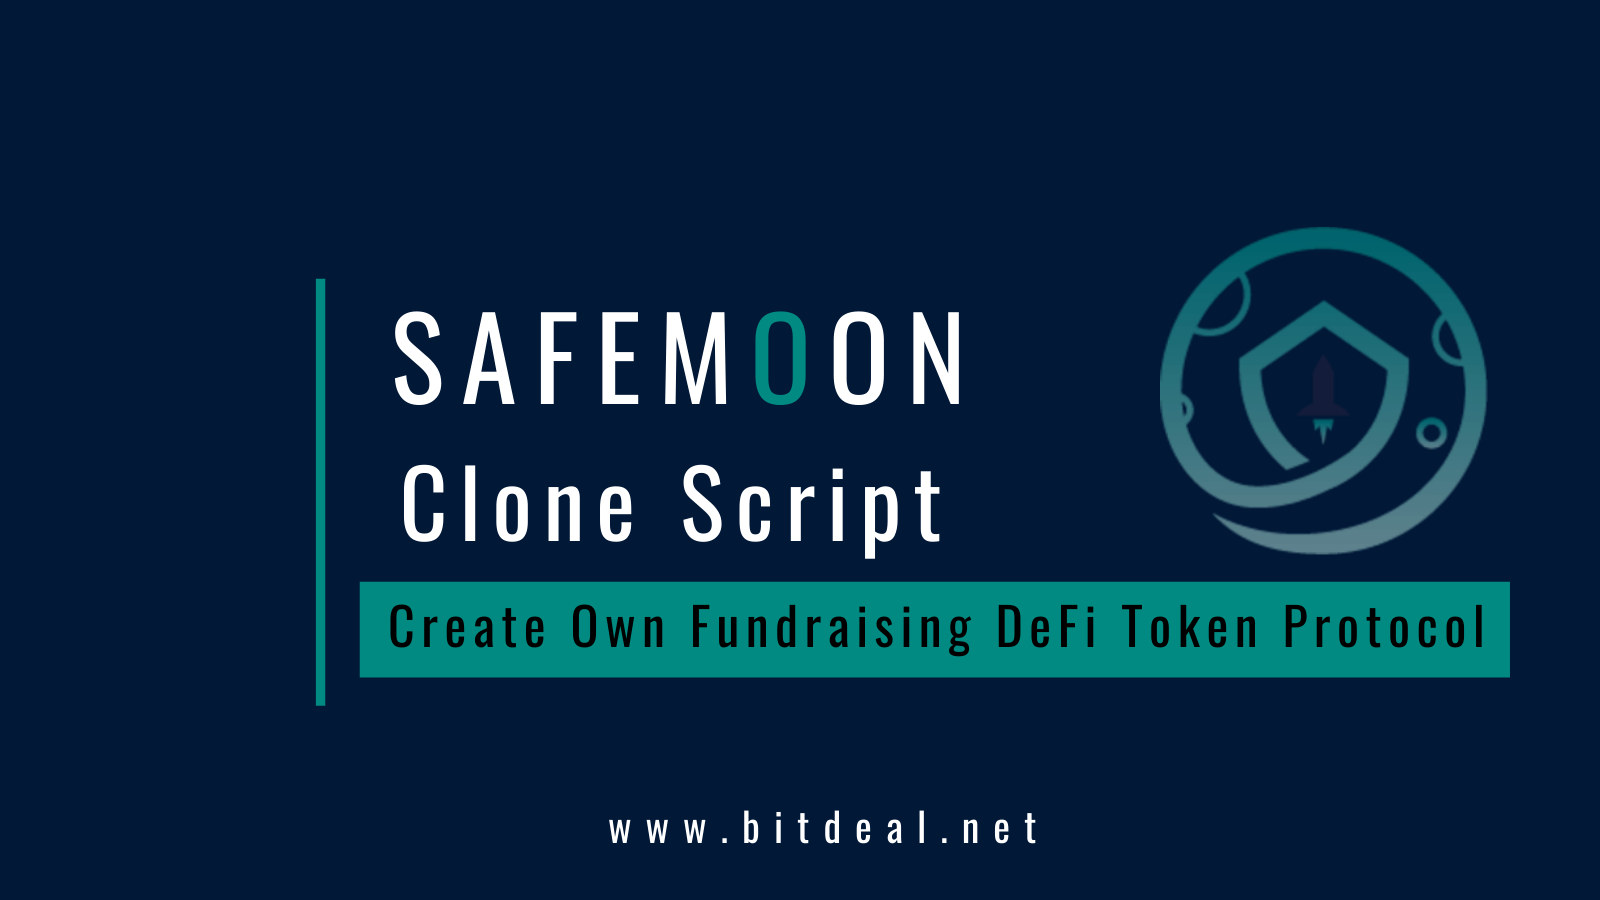 Safe Moon Clone - Create Your Own Fundraising DeFi Protocol like SafeMoon